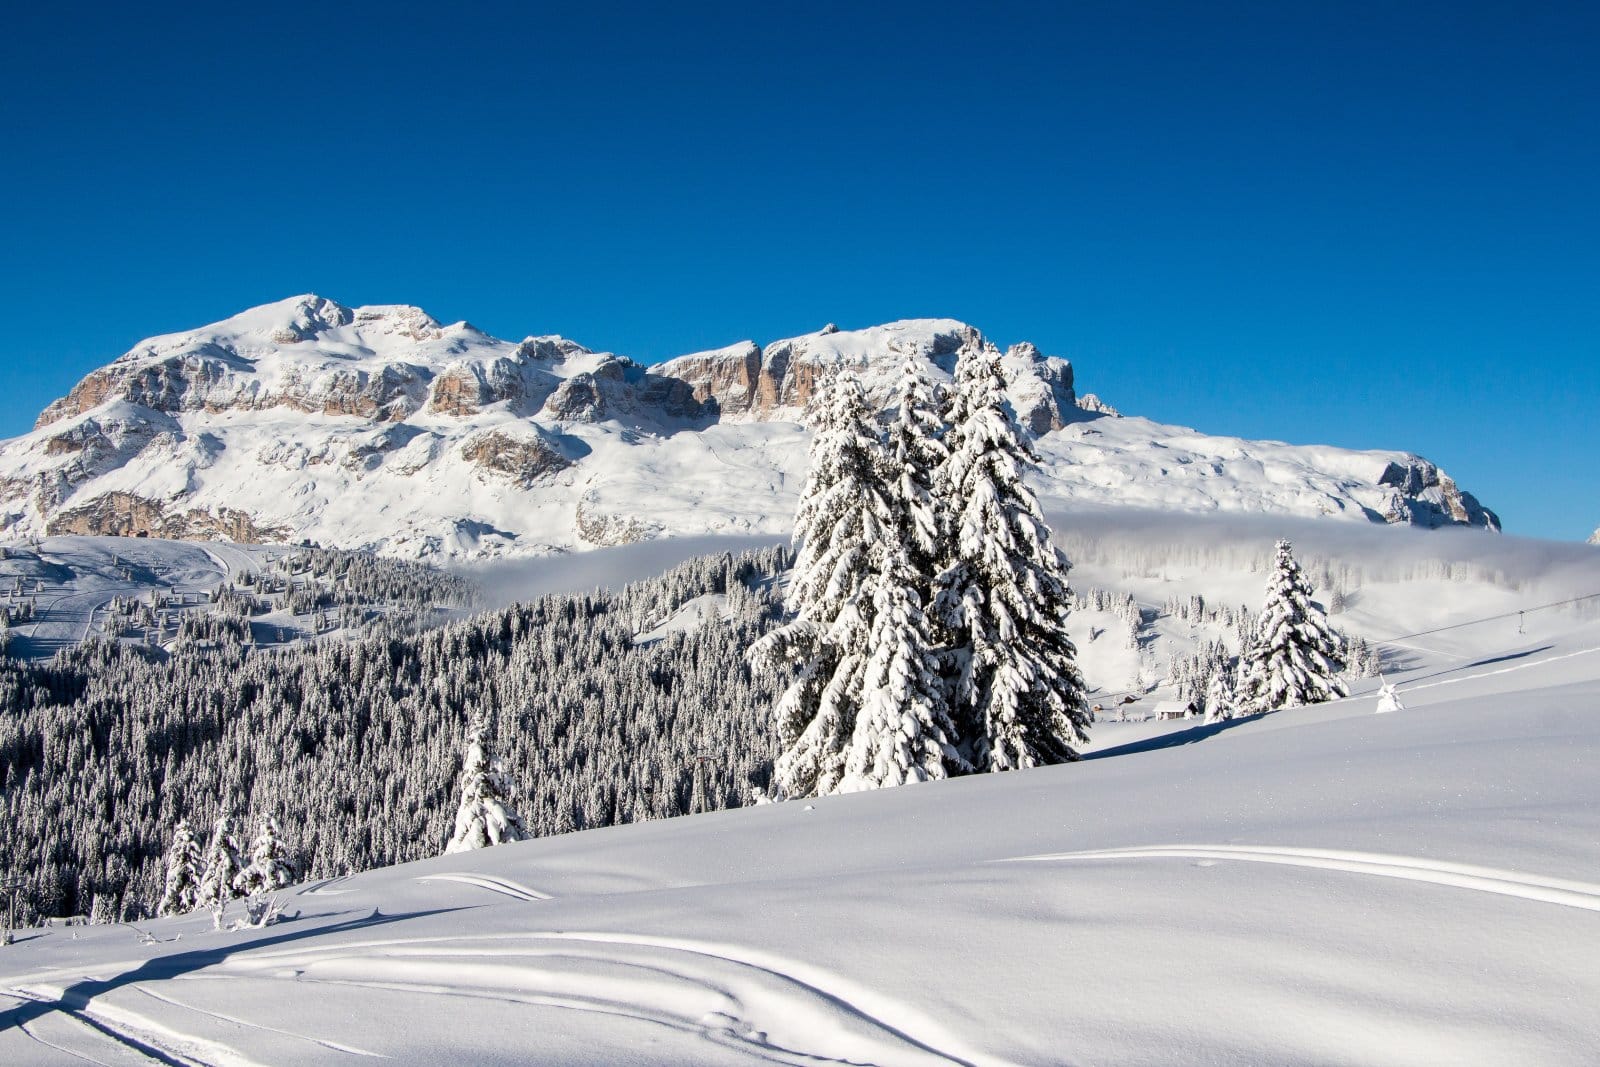 <p class="wp-caption-text">Image Credit: Shutterstock / Tampa</p>  <p><span>Alta Badia, a valley in the heart of the Dolomites, is renowned for its excellent skiing facilities, stunning natural beauty, and culinary excellence. The area is a blend of Italian and Ladin cultures, offering visitors a unique cultural experience. Alta Badia’s slopes are part of the Dolomiti Superski area, making it a paradise for winter sports enthusiasts. In summer, it transforms into a haven for hikers and cyclists, with numerous trails and routes crisscrossing the scenic landscape.</span></p>